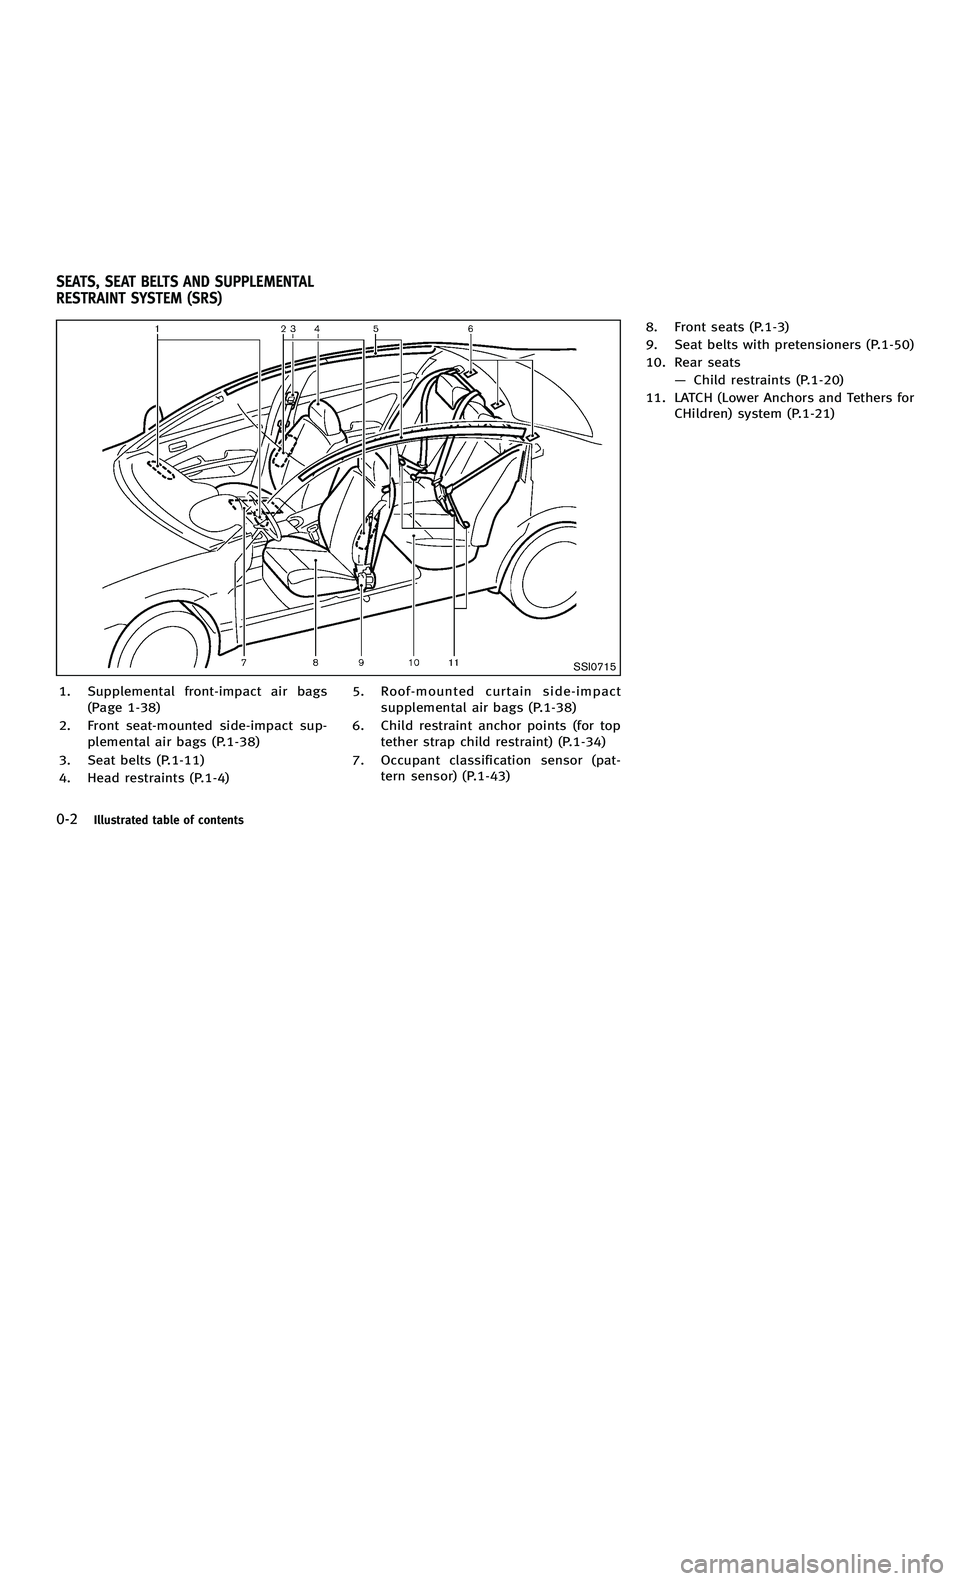 INFINITI M-HEV 2012  Owners Manual 858763.psp Nissan Infiniti OM OM2E HY51U0 Hybrid 1" gutter 12/21/2010 14\
:36:44 11 B
0-2Illustrated table of contents
SSI0715
1. Supplemental front-impact air bags(Page 1-38)
2. Front seat-mounted si